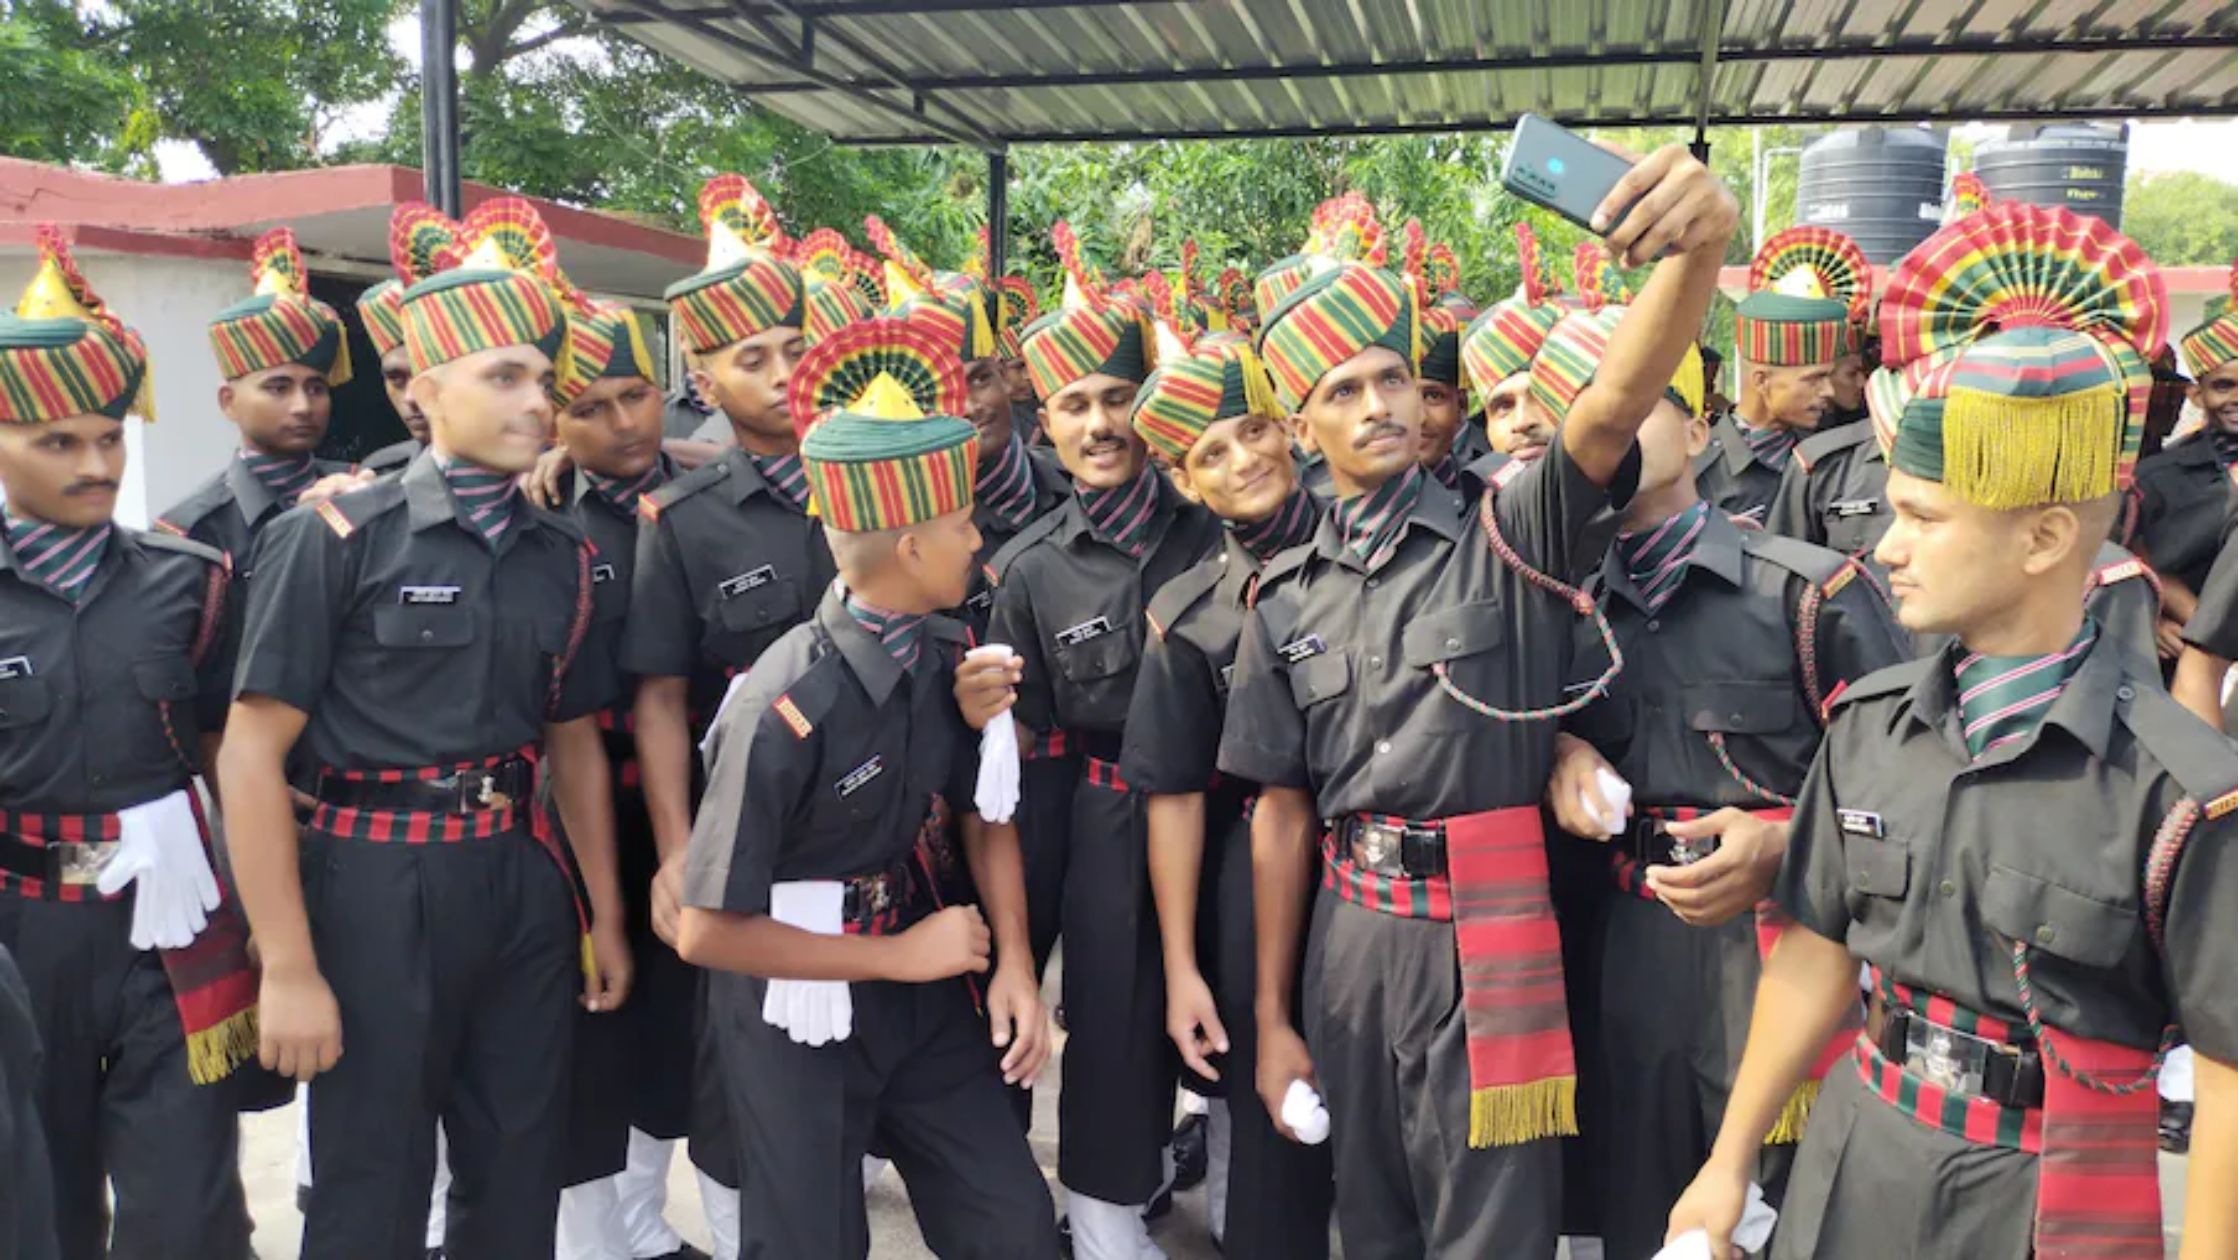 293 recruits were inducted into army at bihar regimental center